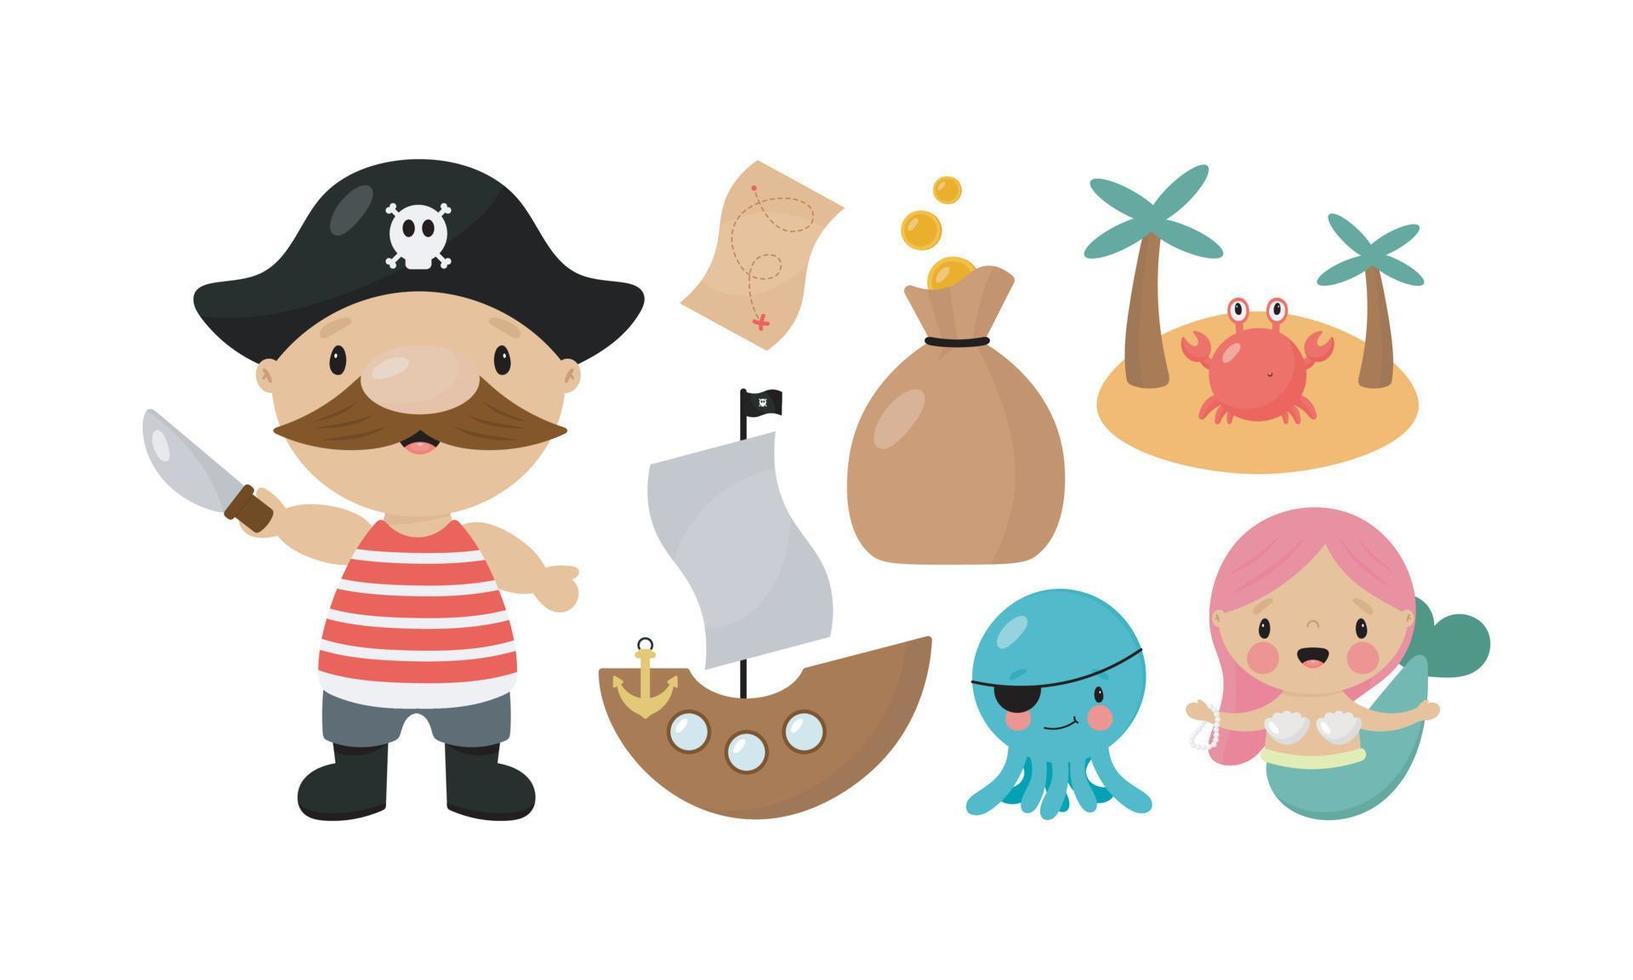 Pirate set. Pirate, octopus, ship, island, map, mermaid, bag of gold. Good for birthday cards, invitations, stickers, prints etc. Vector illustration in cartoon style. Isolated on a white background.